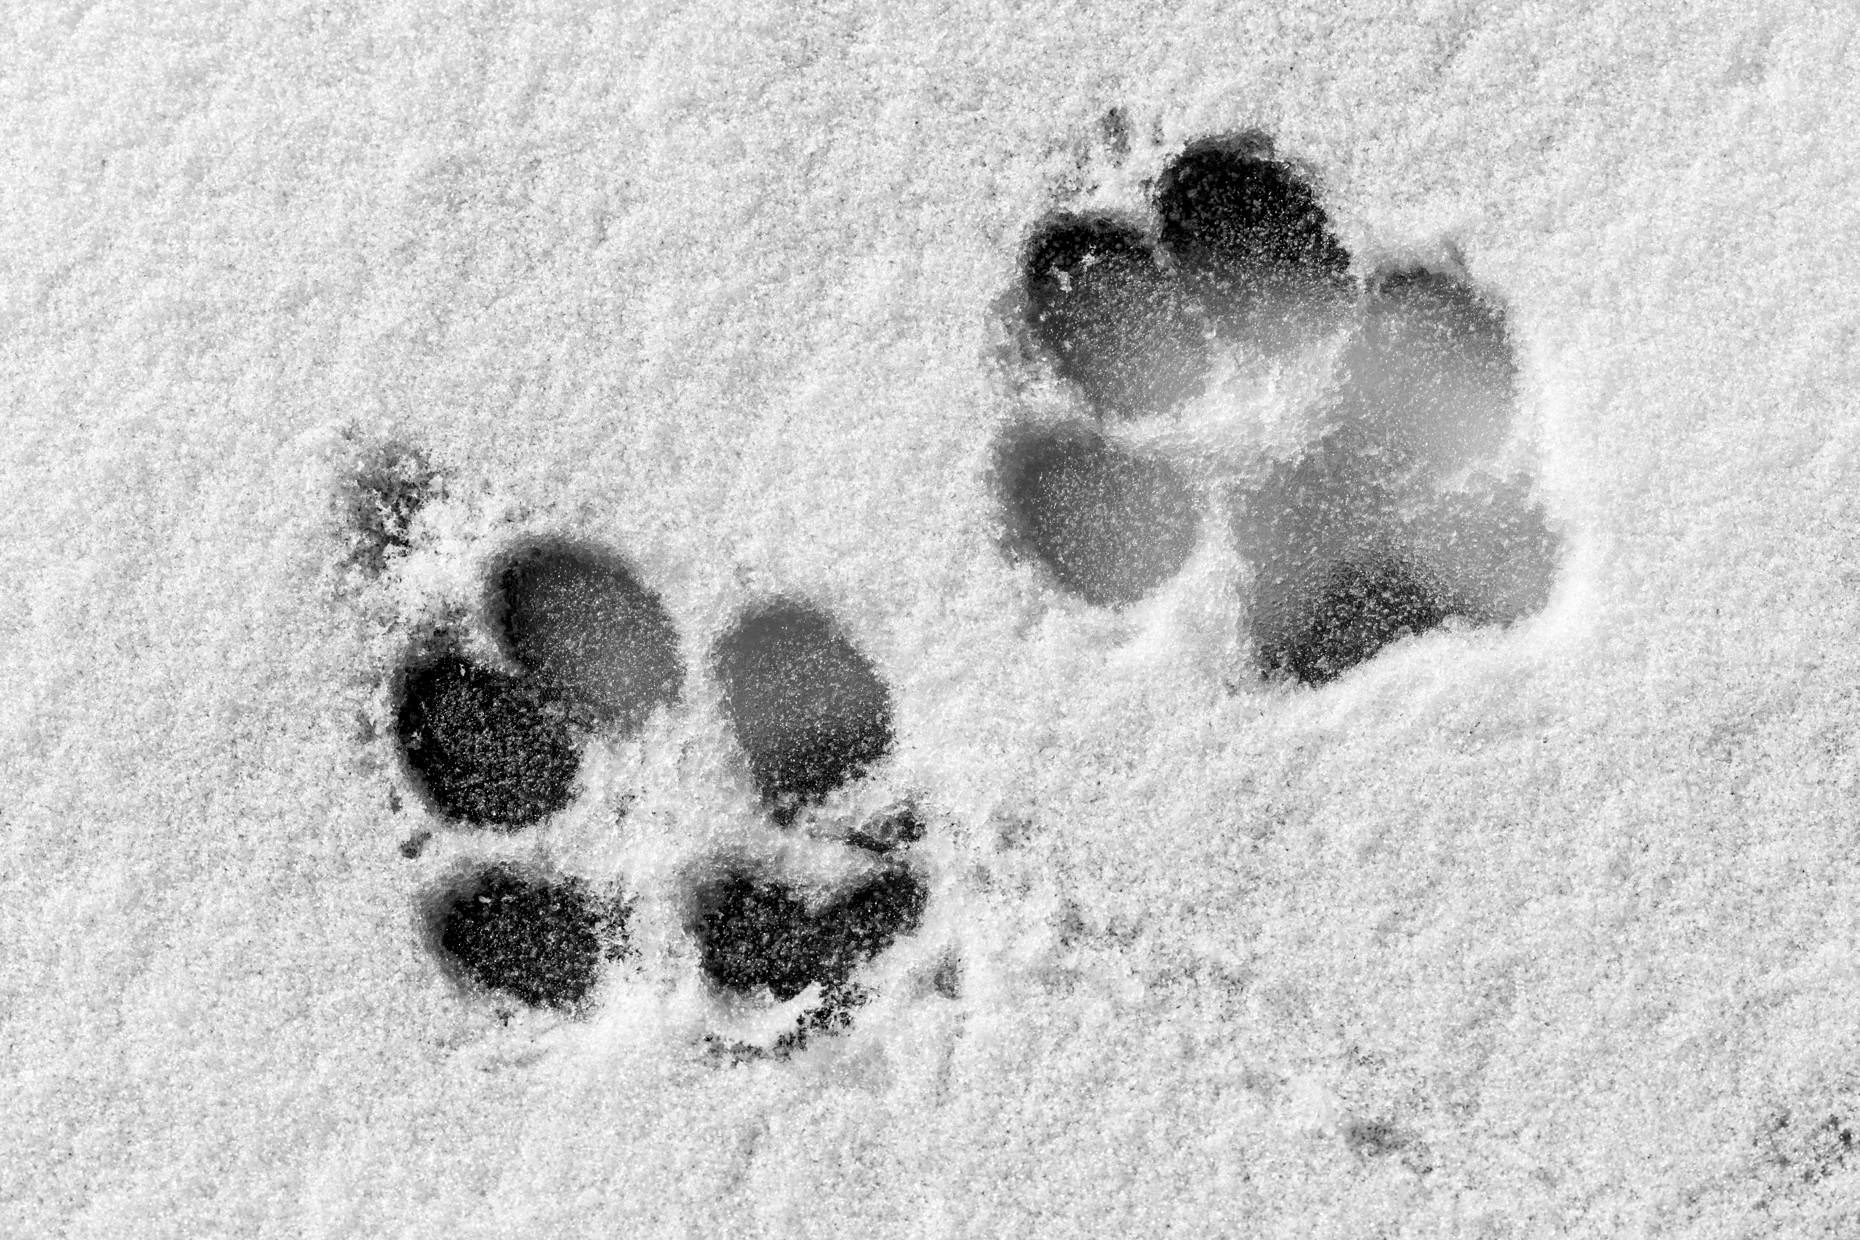 Black & white, dog footprints on snow & ice on the Arkansas RIver which runs through the downtown historic district of the small mountain town of Salida, Colorado, USA